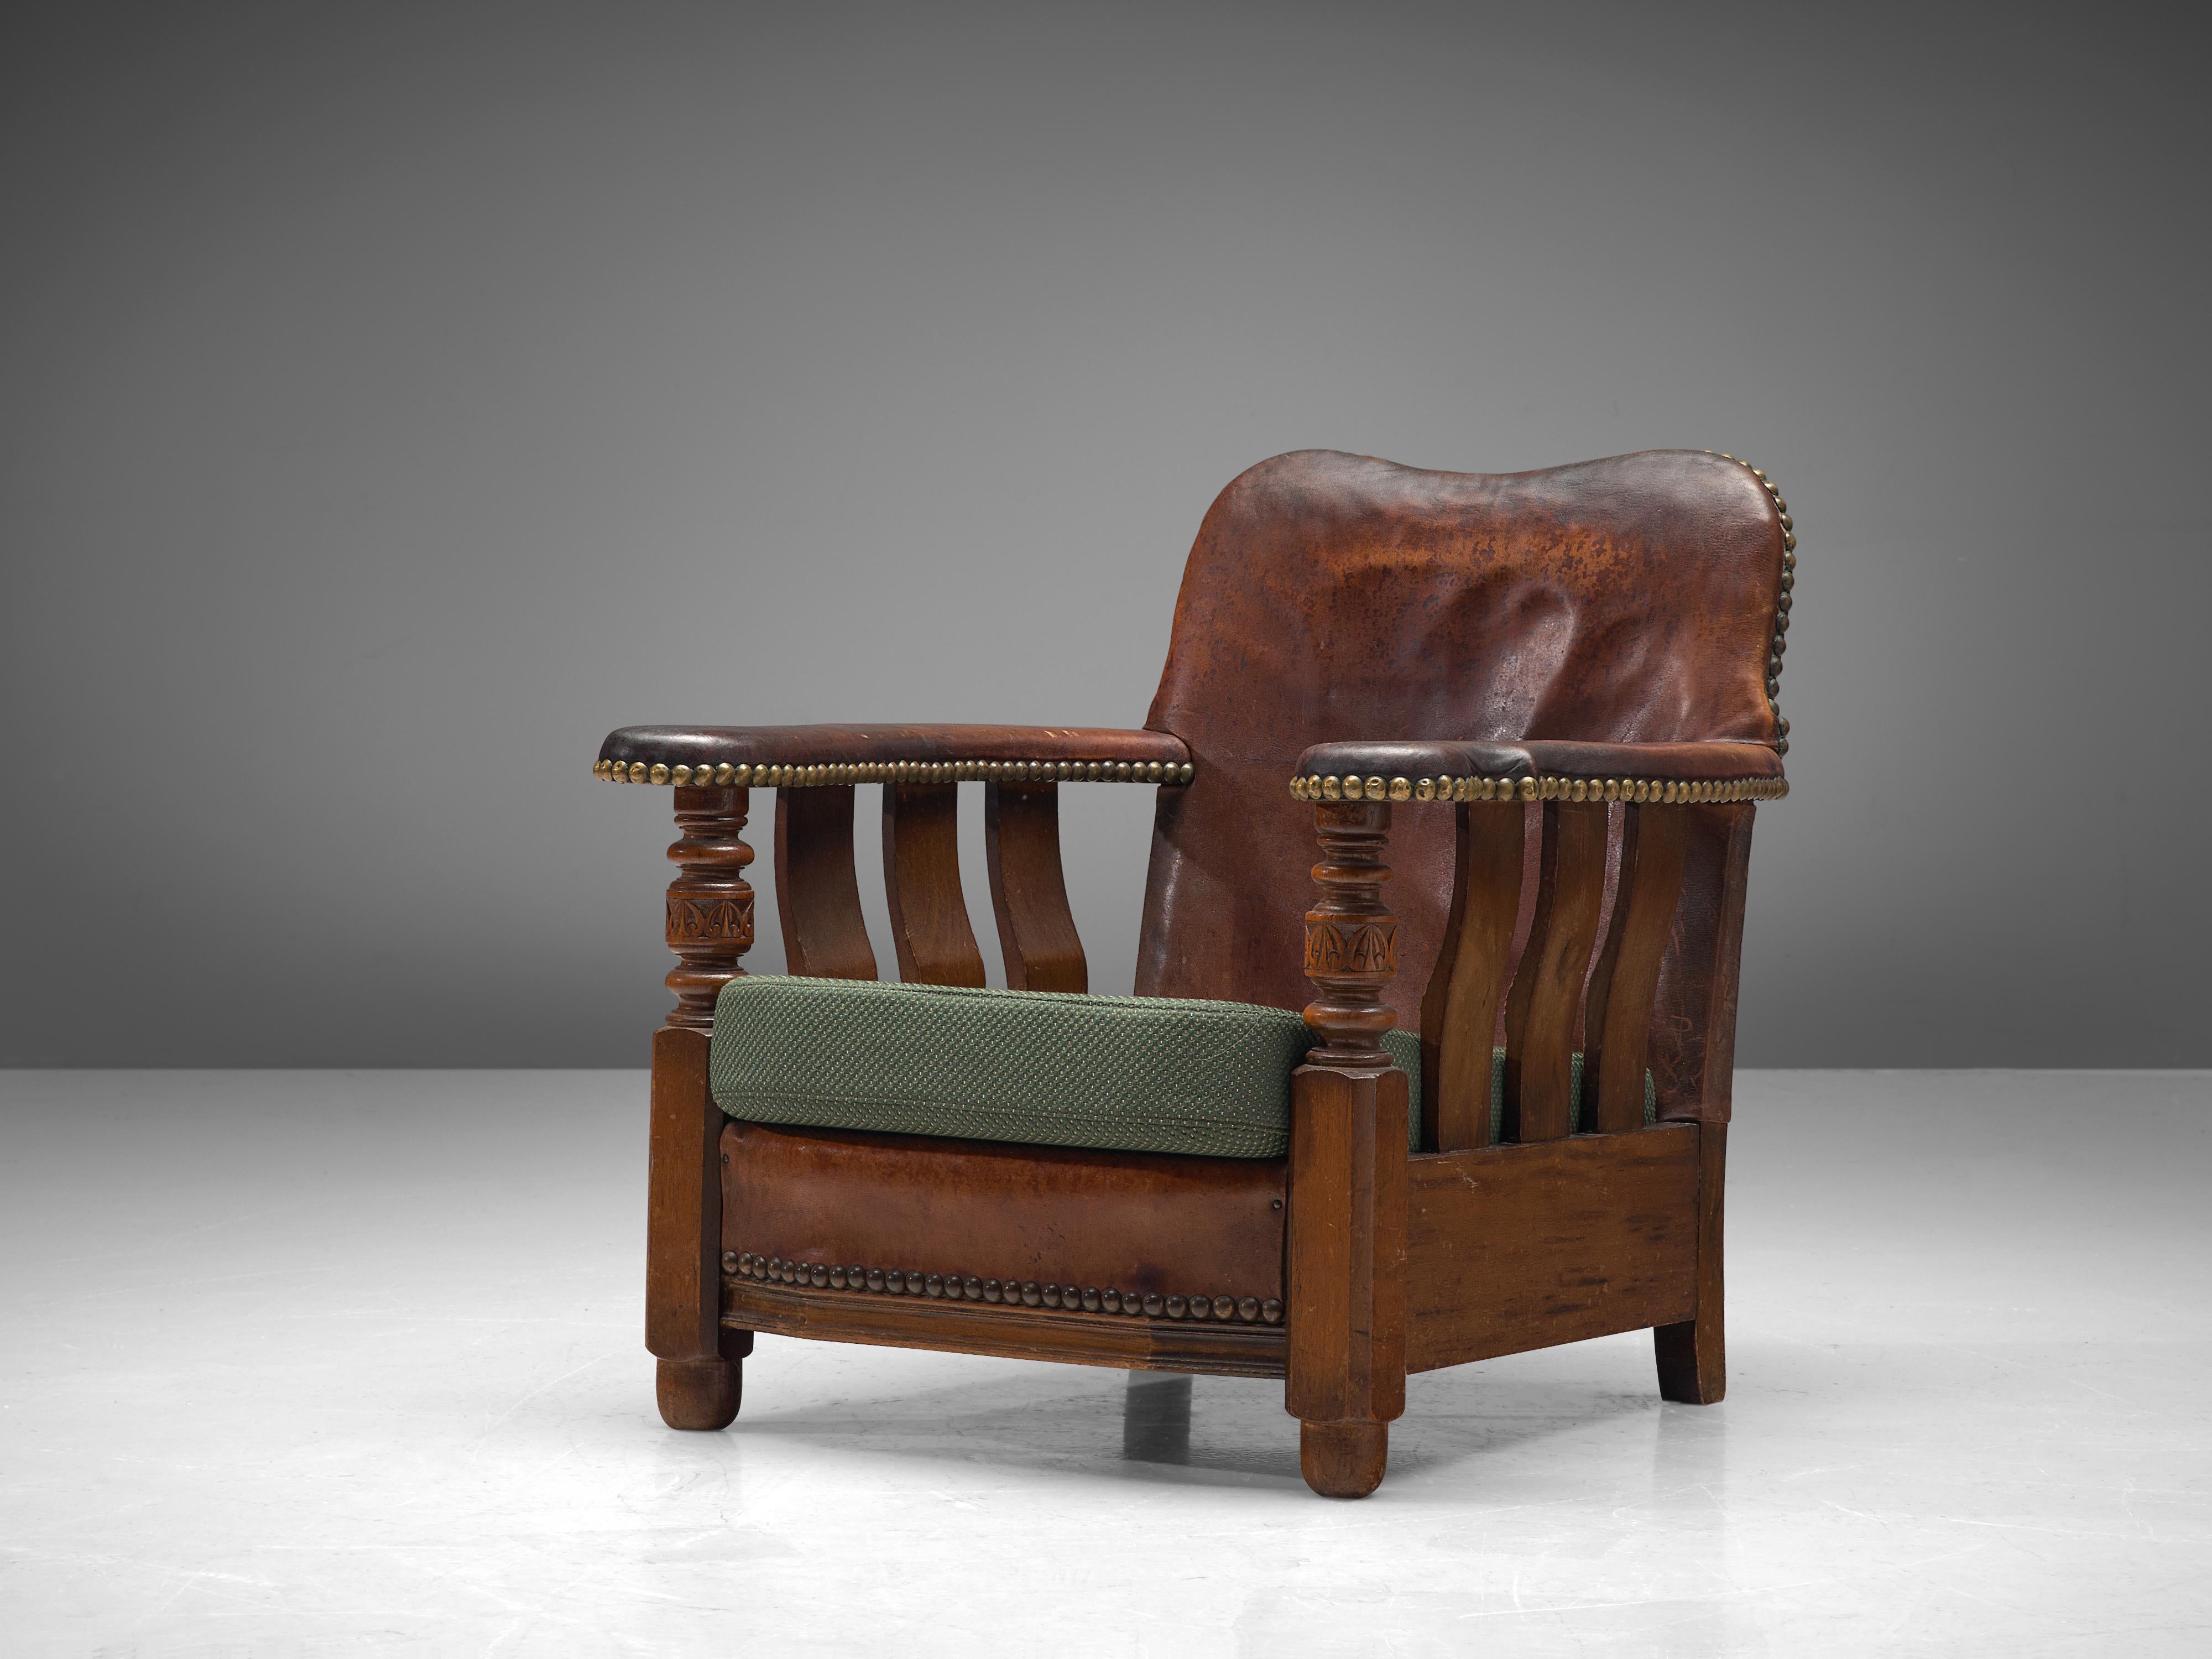 Armchair, stained ash, leather, fabric, Denmark, 1920s.

Exceptional example of early Danish design, this lounge chair with robust, bulky aesthetics. The frame of the chair is made of stained ash. The back and armrests are upholstered with nail